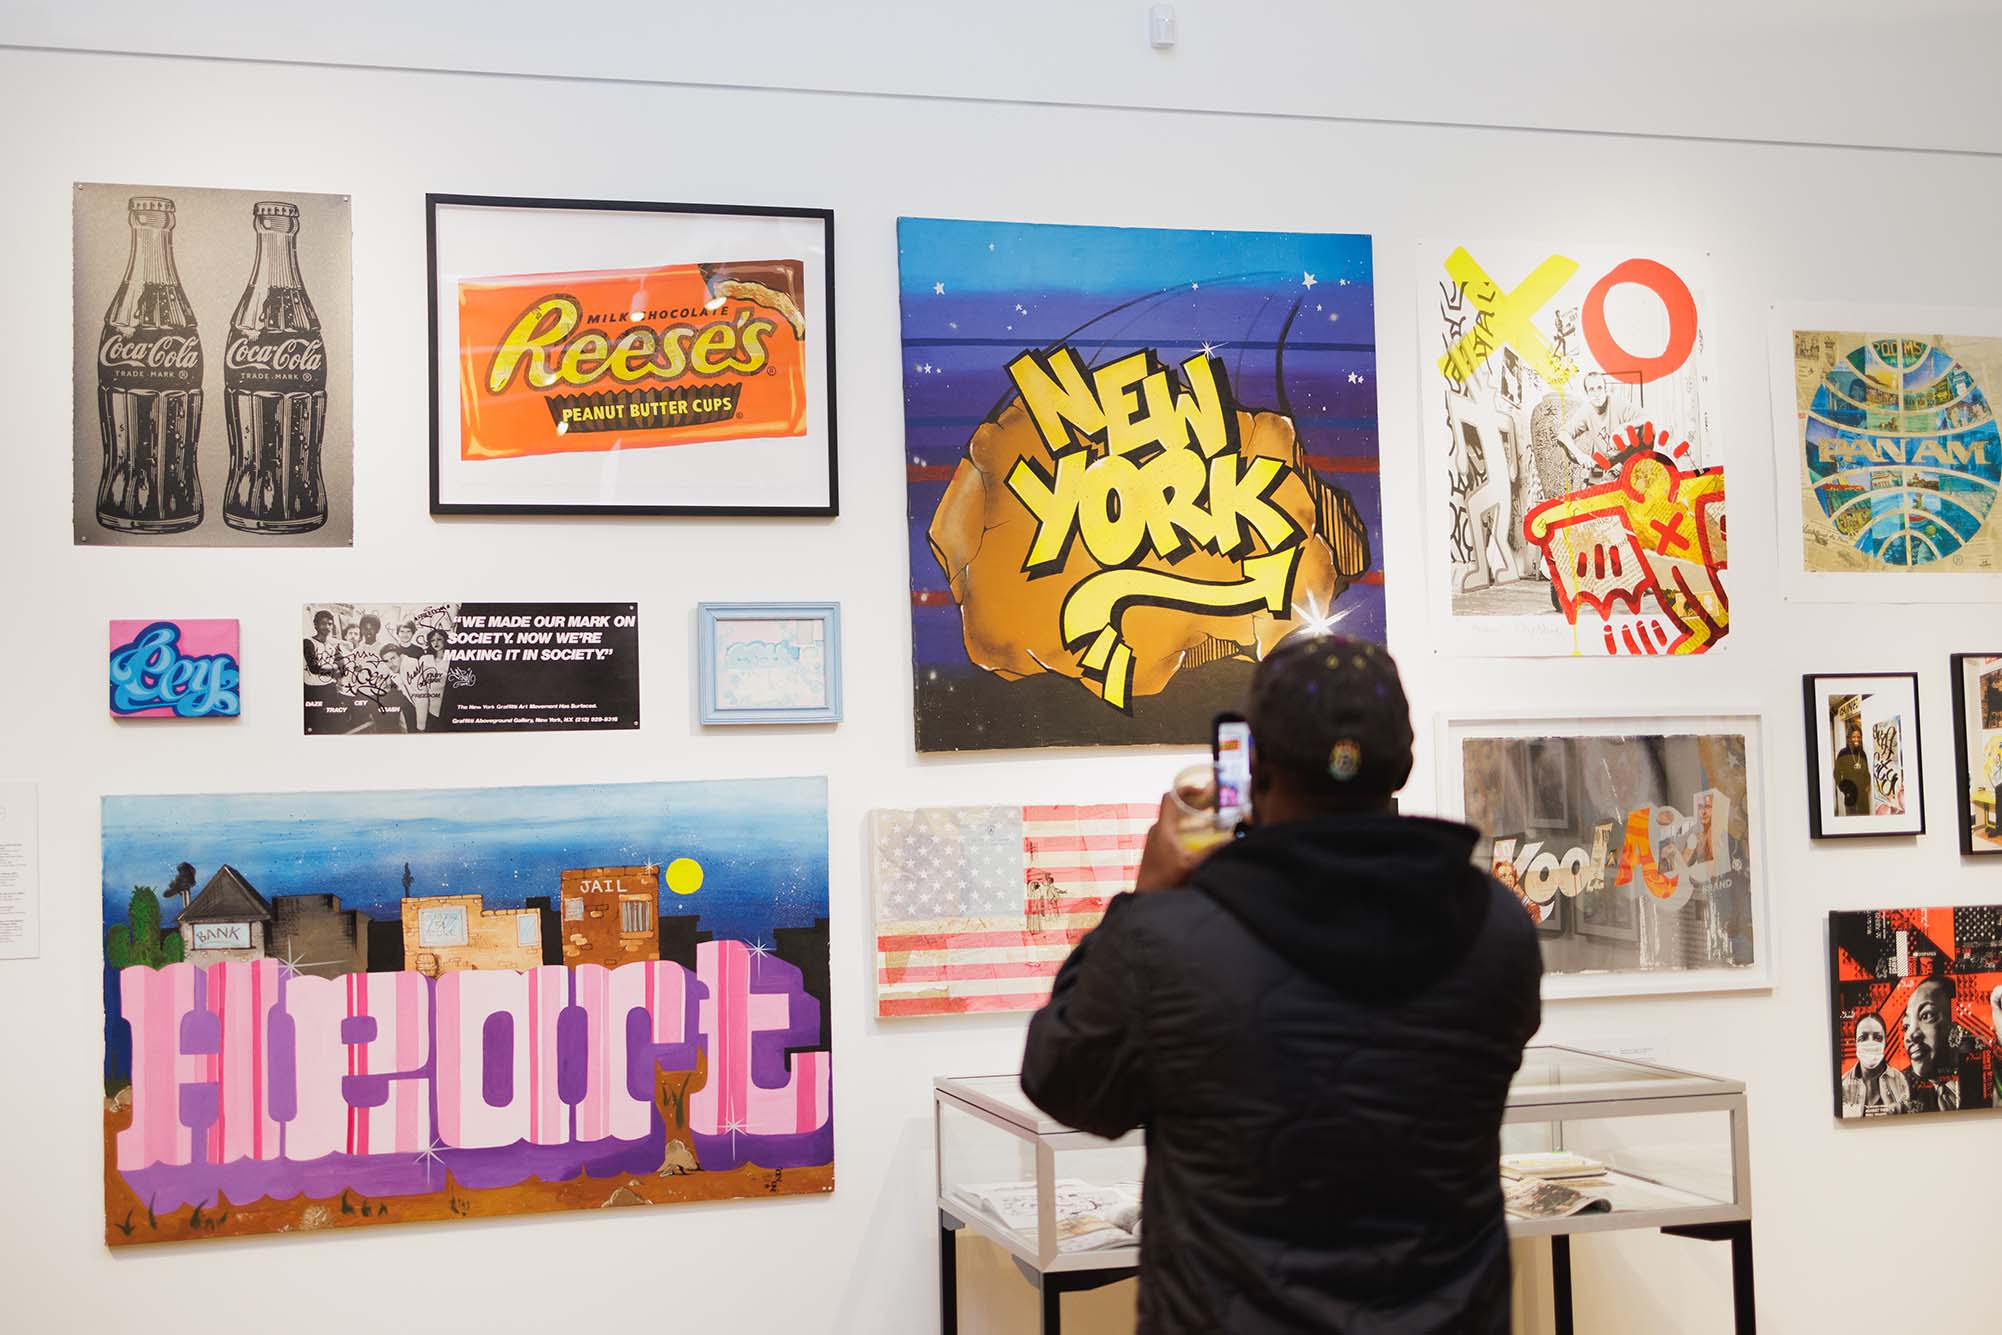 Photo: A person snaps a photo on their phone of a gallery wall in Cey Adams' exhibit. Wall shows various graffiti works and depictions.